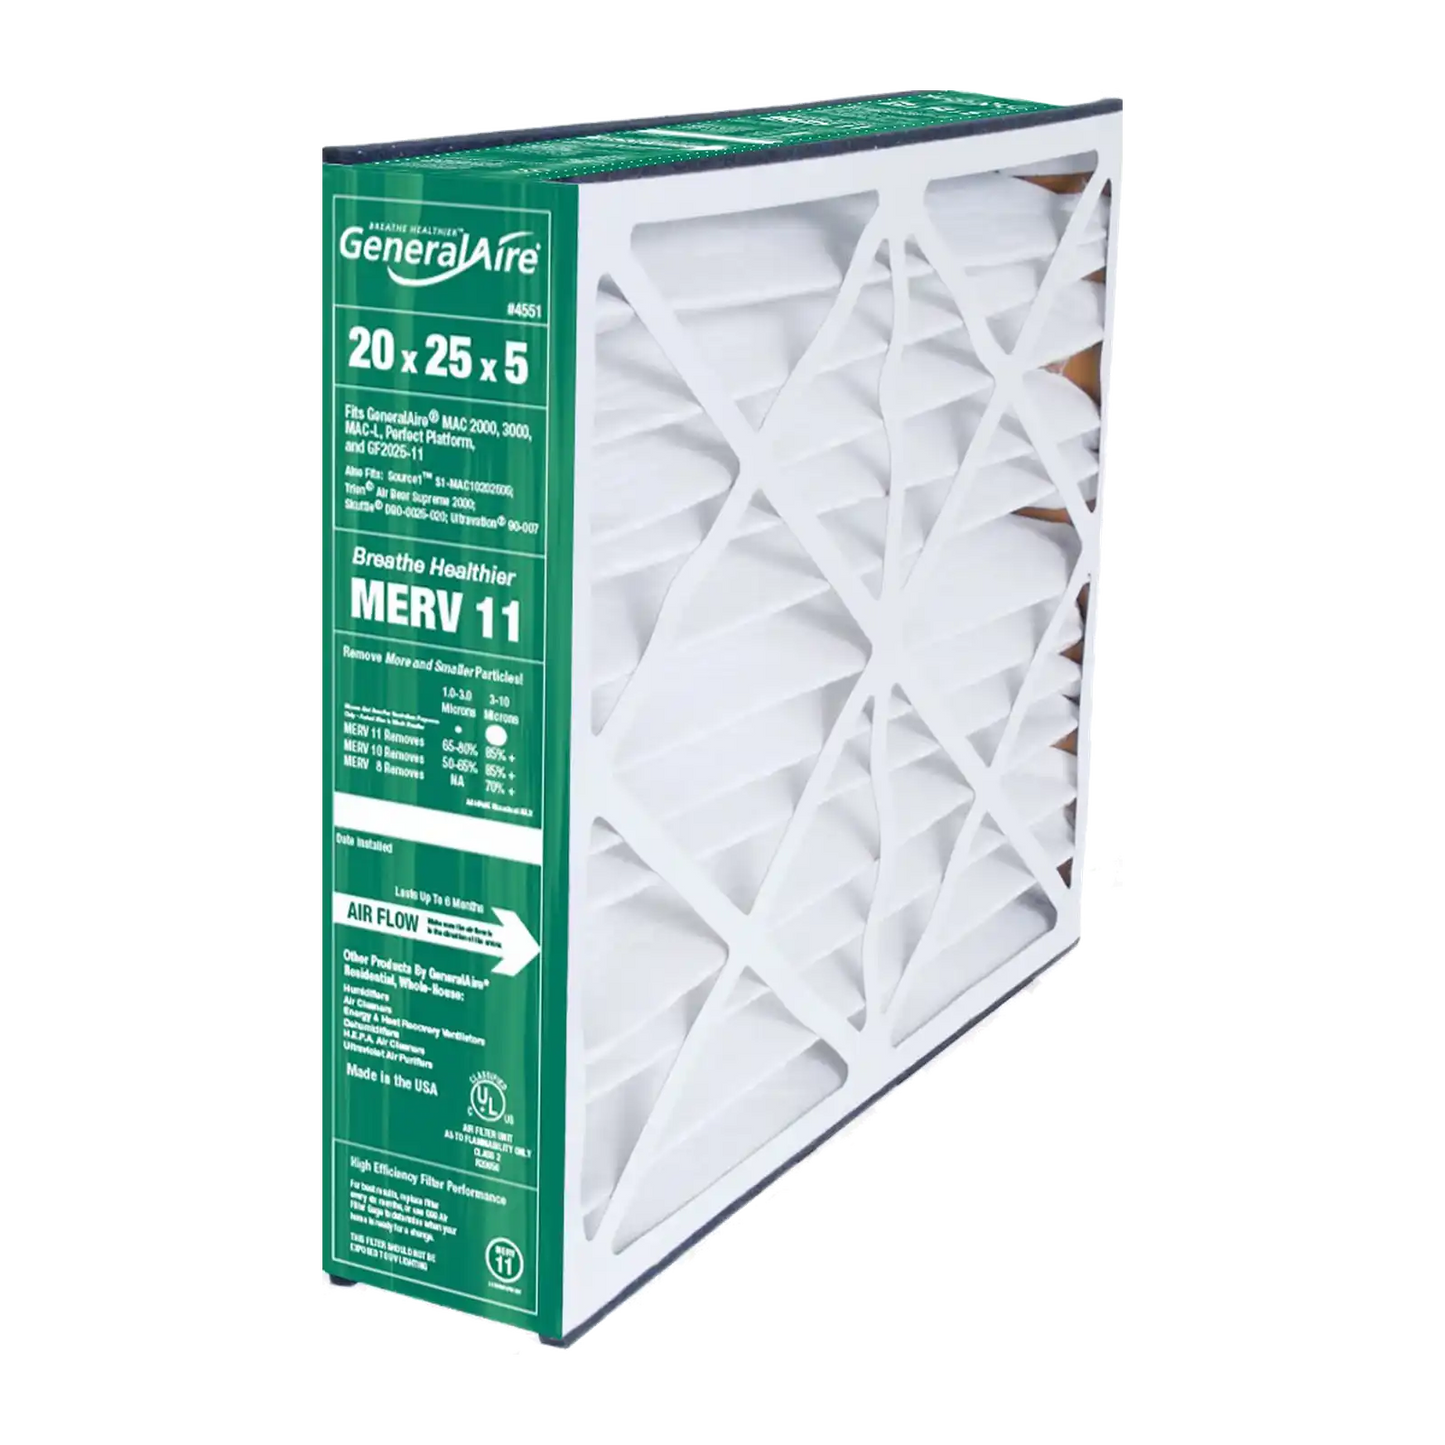 GeneralAire ReservePro 4551 20x25x5 Furnace Filter